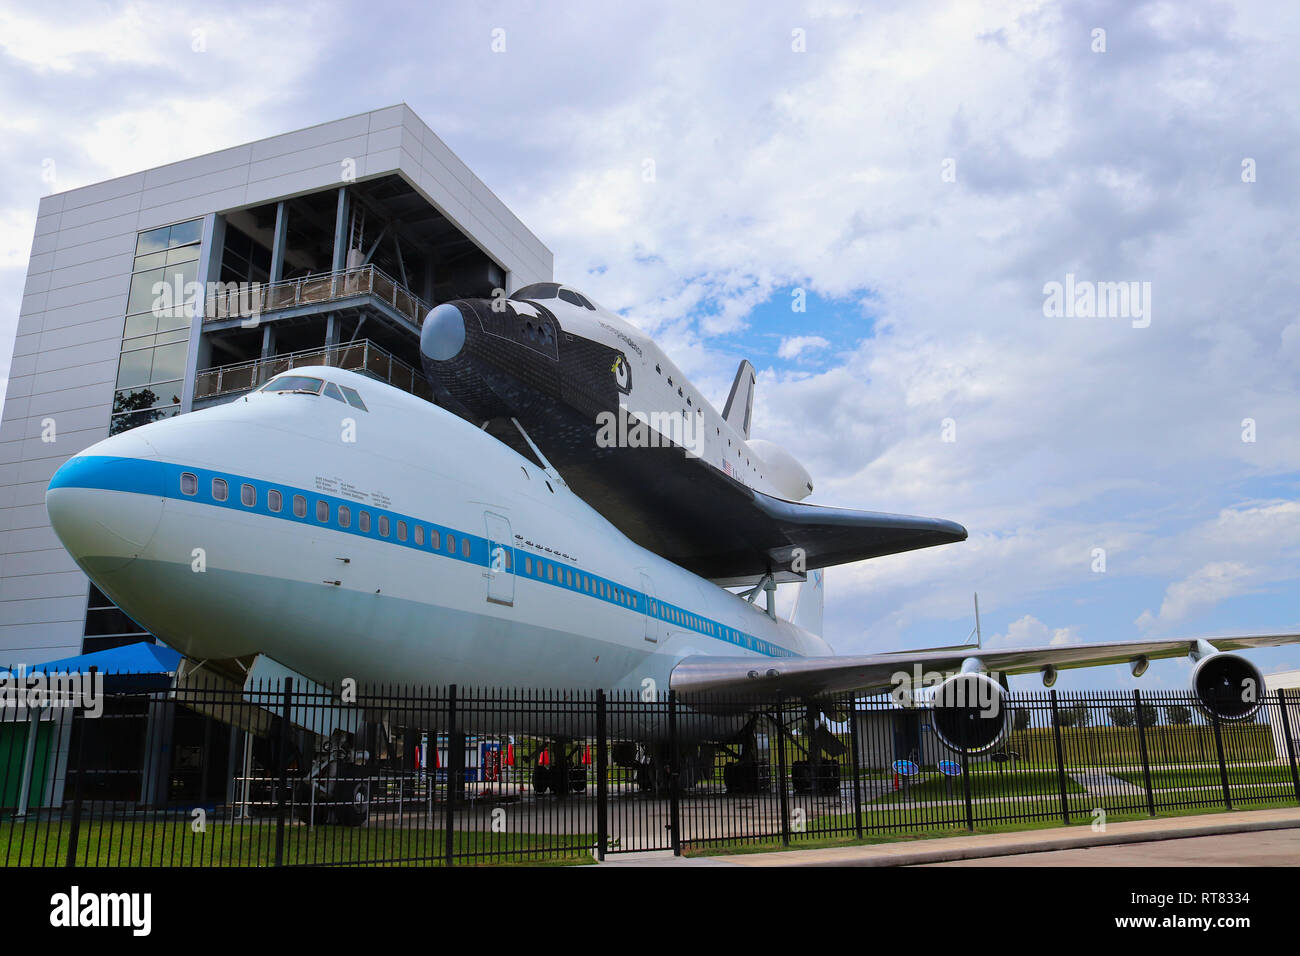 HOUSTON, TEXAS, USA - JUNE 9, 2018: The NASA Space Shuttle Independence sits atop the NASA 905 Shuttle Carrier Aircraft at Space Center Houston, Texas Stock Photo